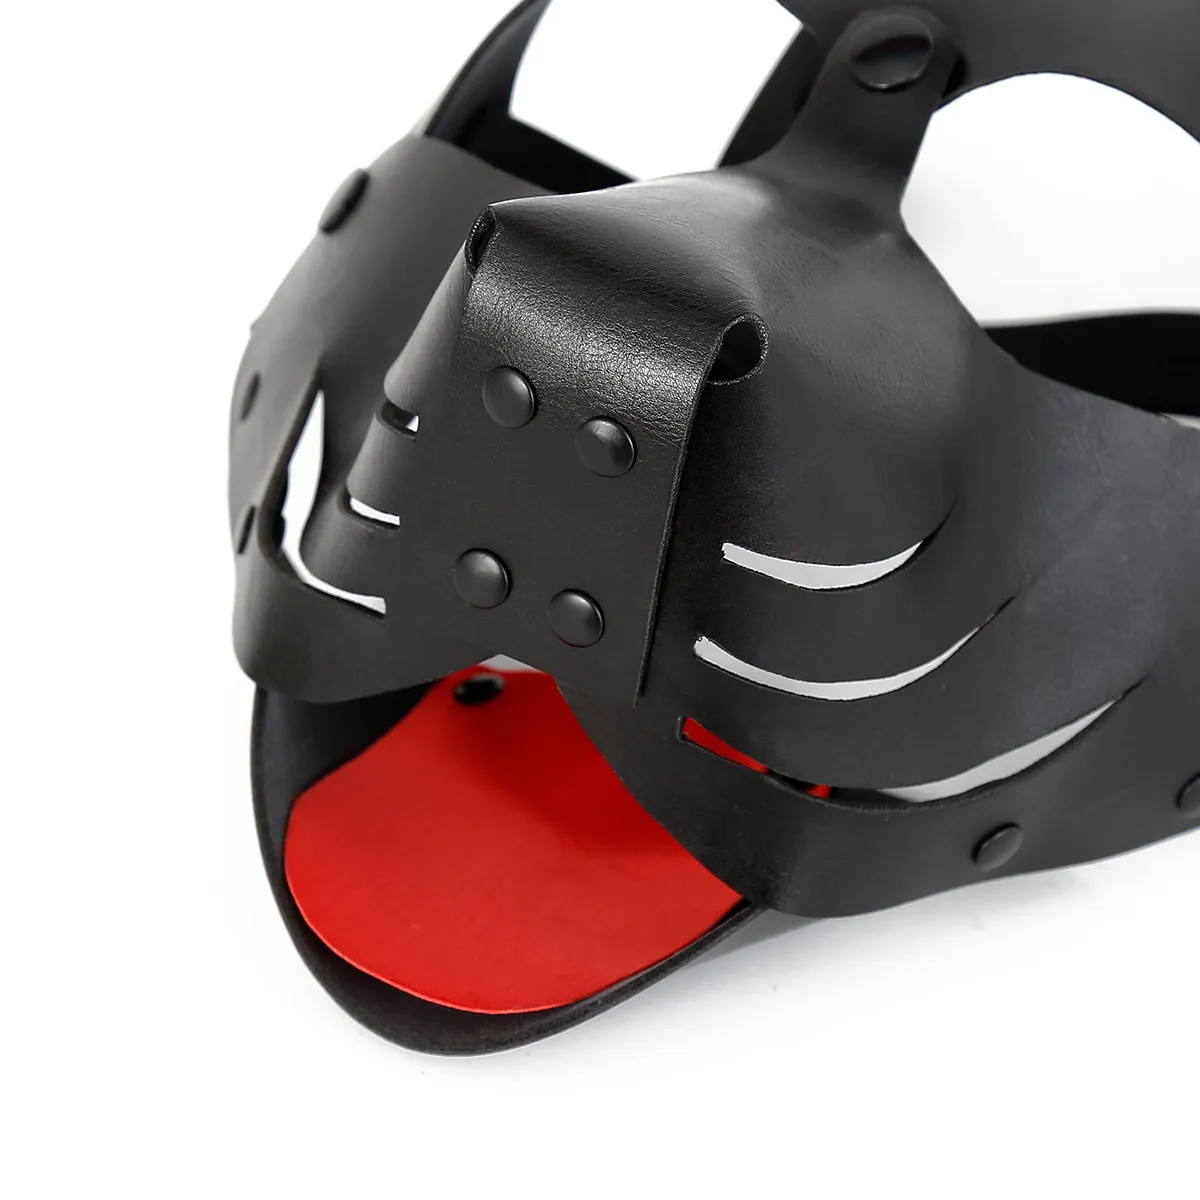 Puppy Play Bdsm Bondage Dog Mask Hood Slave Cosplay Fetish SM Adult Game Erotic sexy Toy For Couple Restraint Pup Party